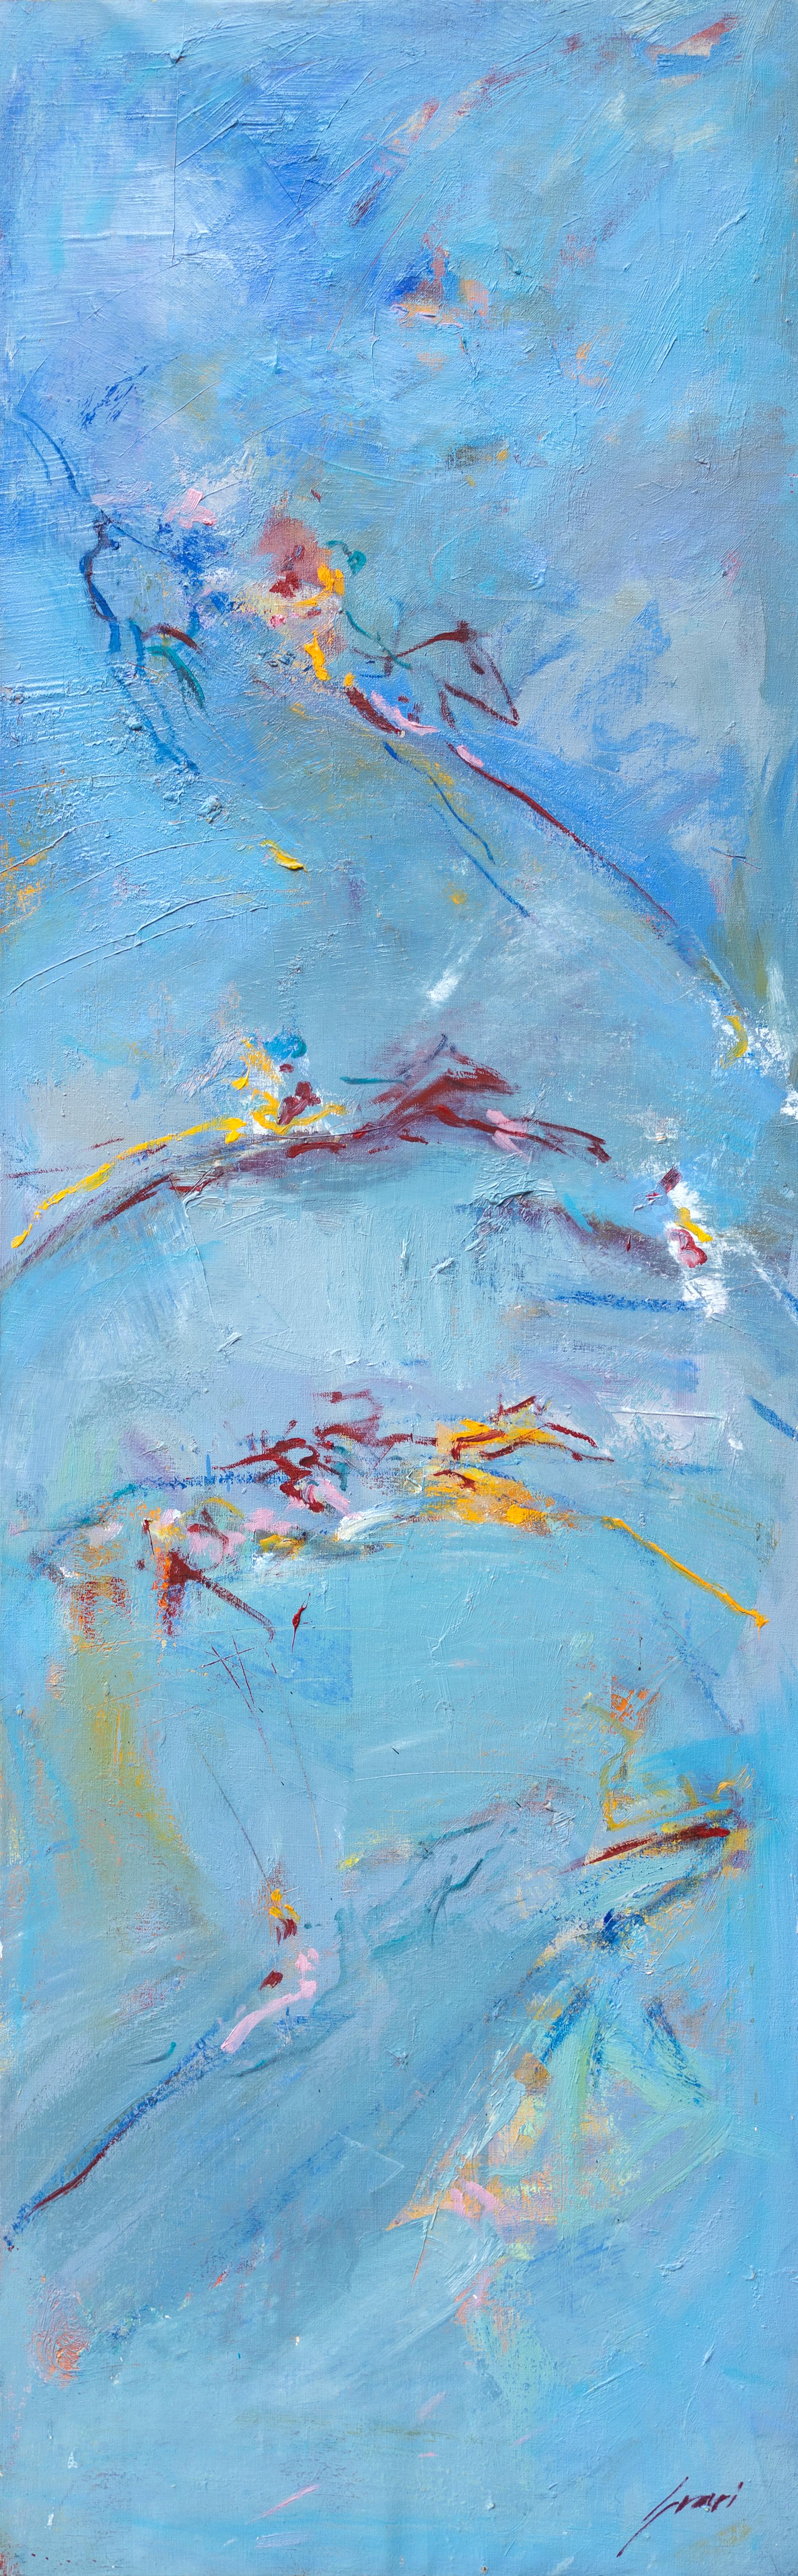 This abstract expressionist piece by Mallorcan artist Pep Suari gracefully depicts the movement of four horses across a sky blue background. 
By Pep Suari
57.5" x 18.25"  Acrylic on Canvas